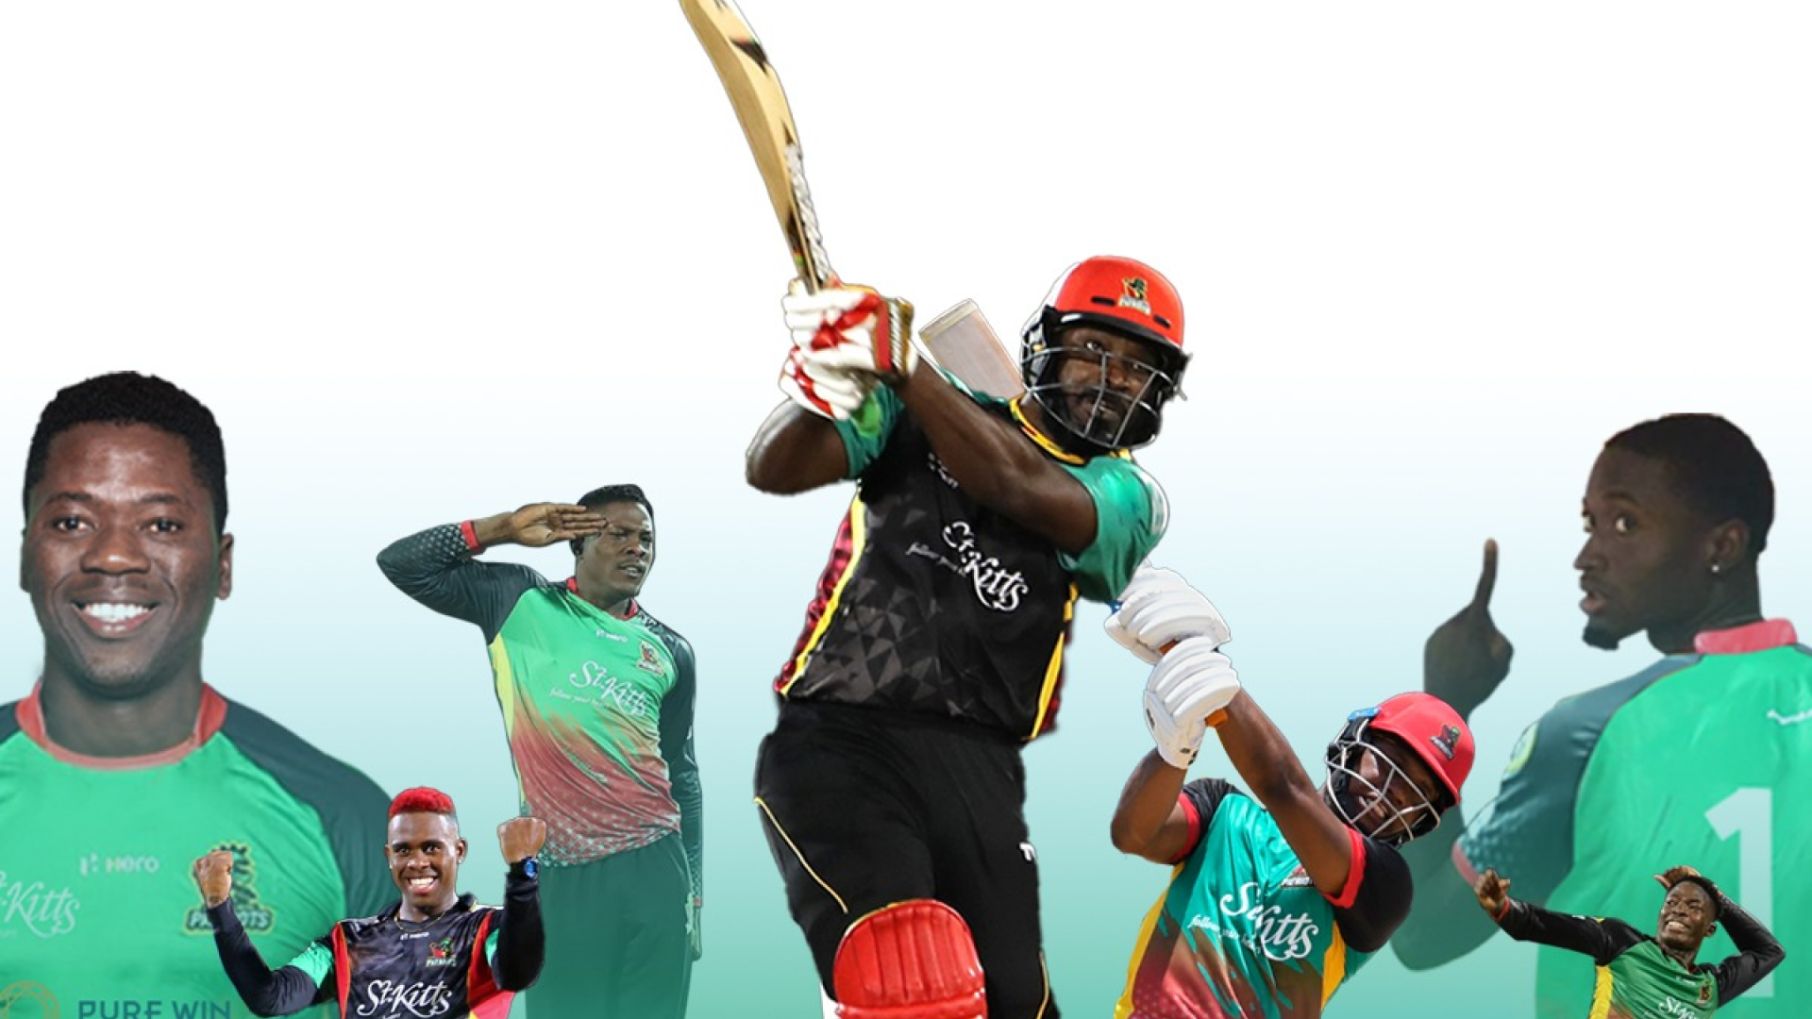 CPL 2021 | Team Preview: Can Dwayne Bravo and Chris Gayle combine to win the elusive trophy for Patriots?